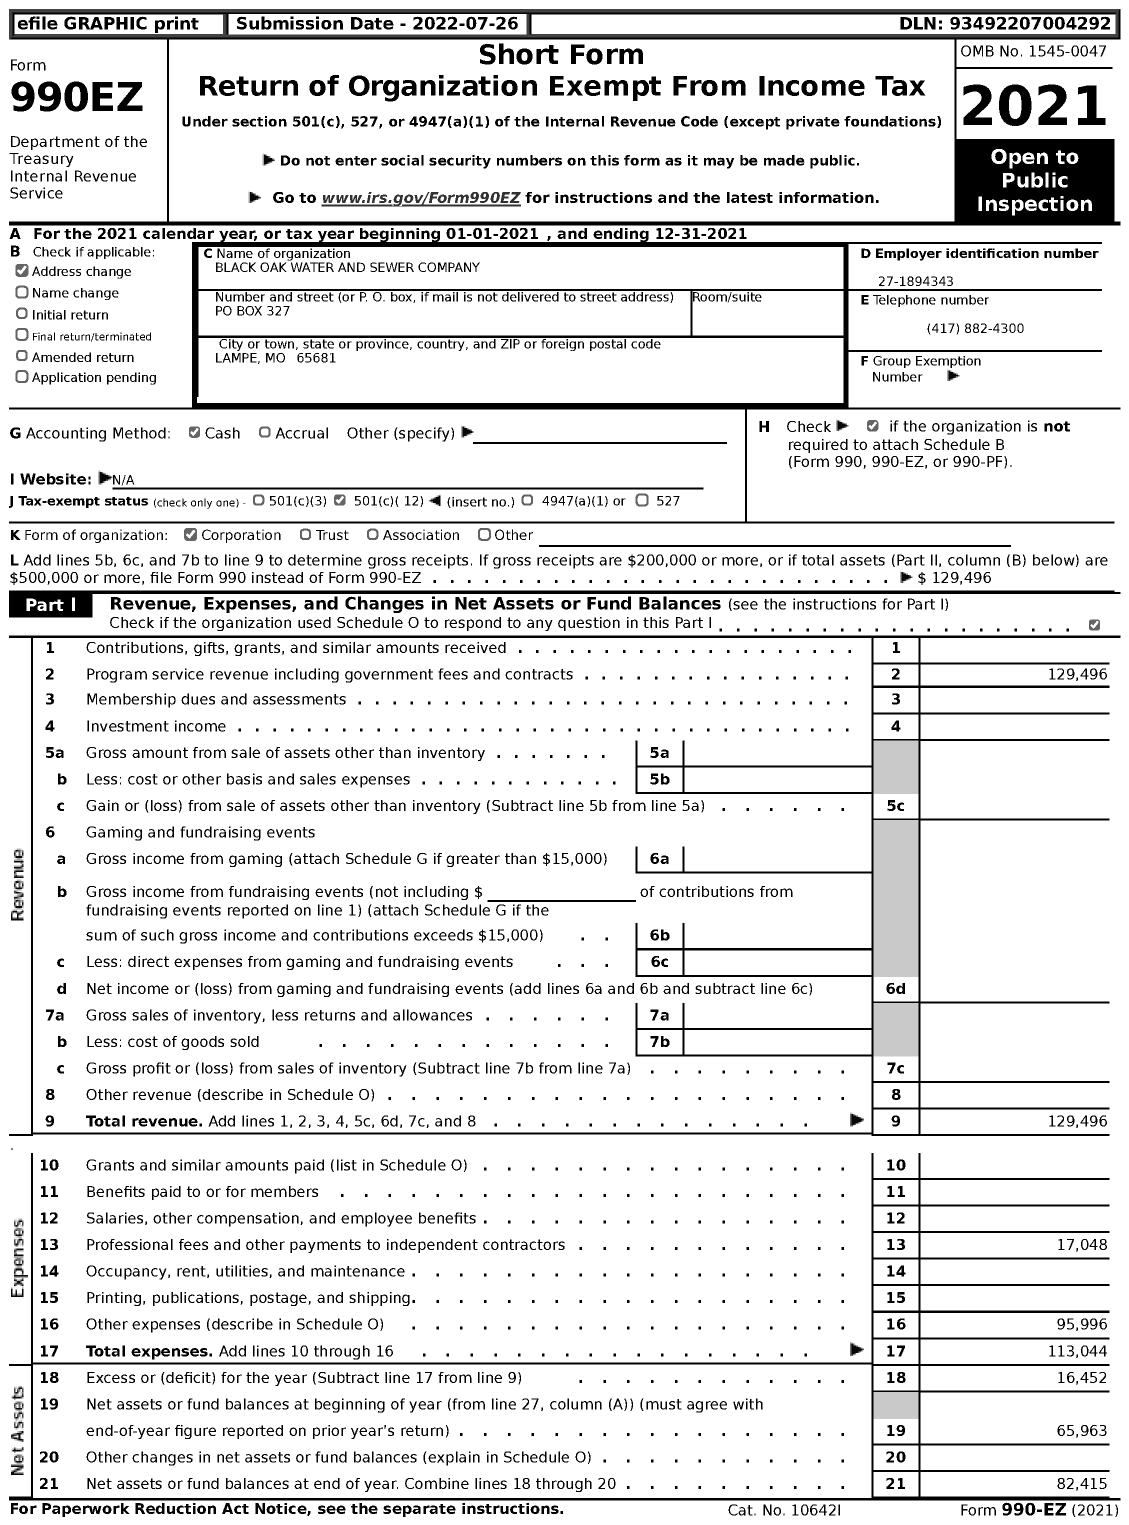 Image of first page of 2021 Form 990EZ for Black Oak Water and Sewer Company